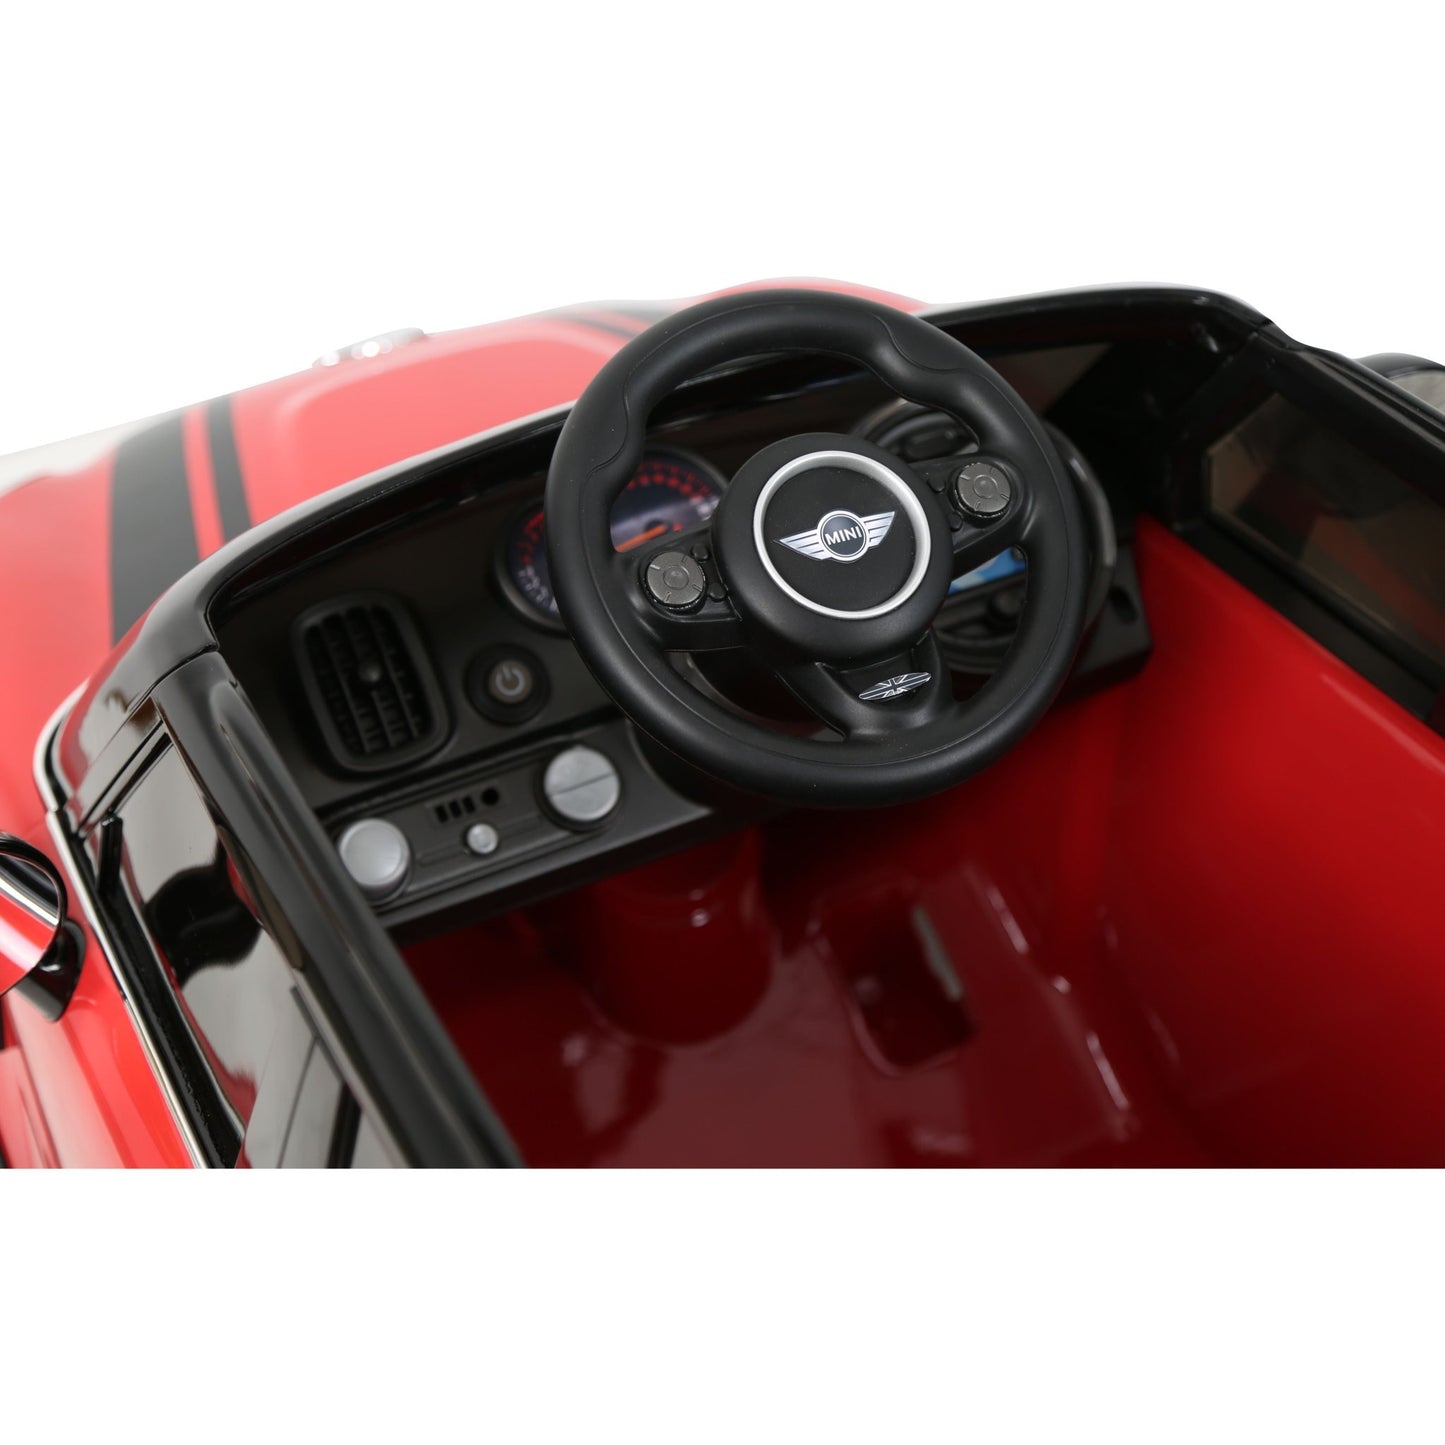 Mini Countryman 6 Volt Car with Remote Control - Red - The Online Toy Shop - Powered Car - 4